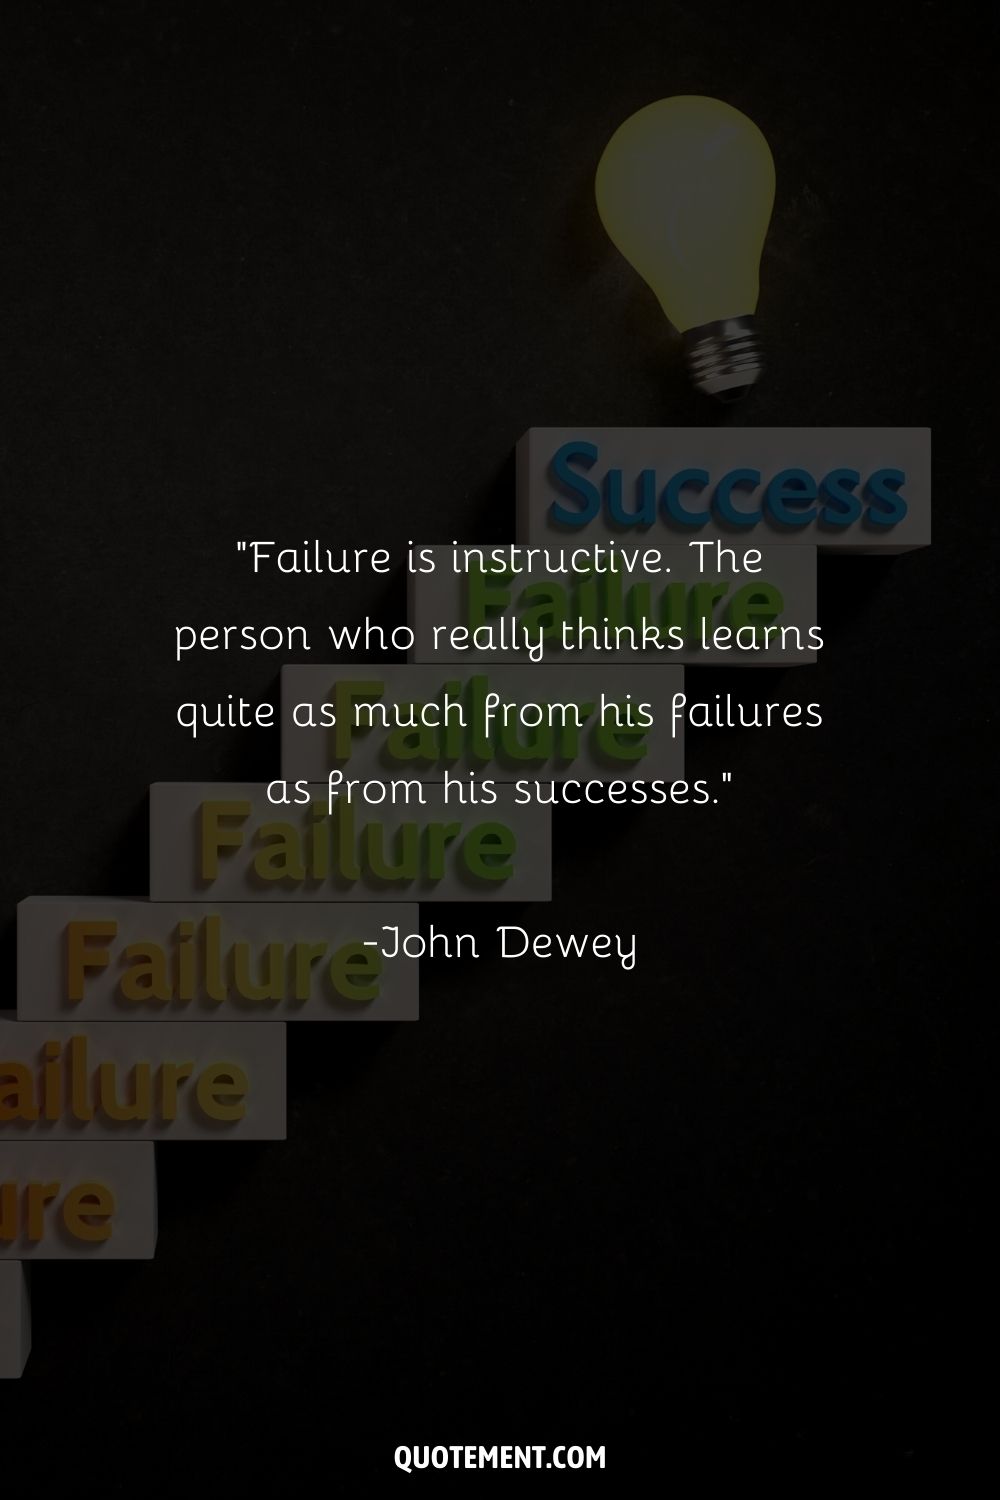 “Failure is instructive. The person who really thinks learns quite as much from his failures as from his successes.” ― John Dewey